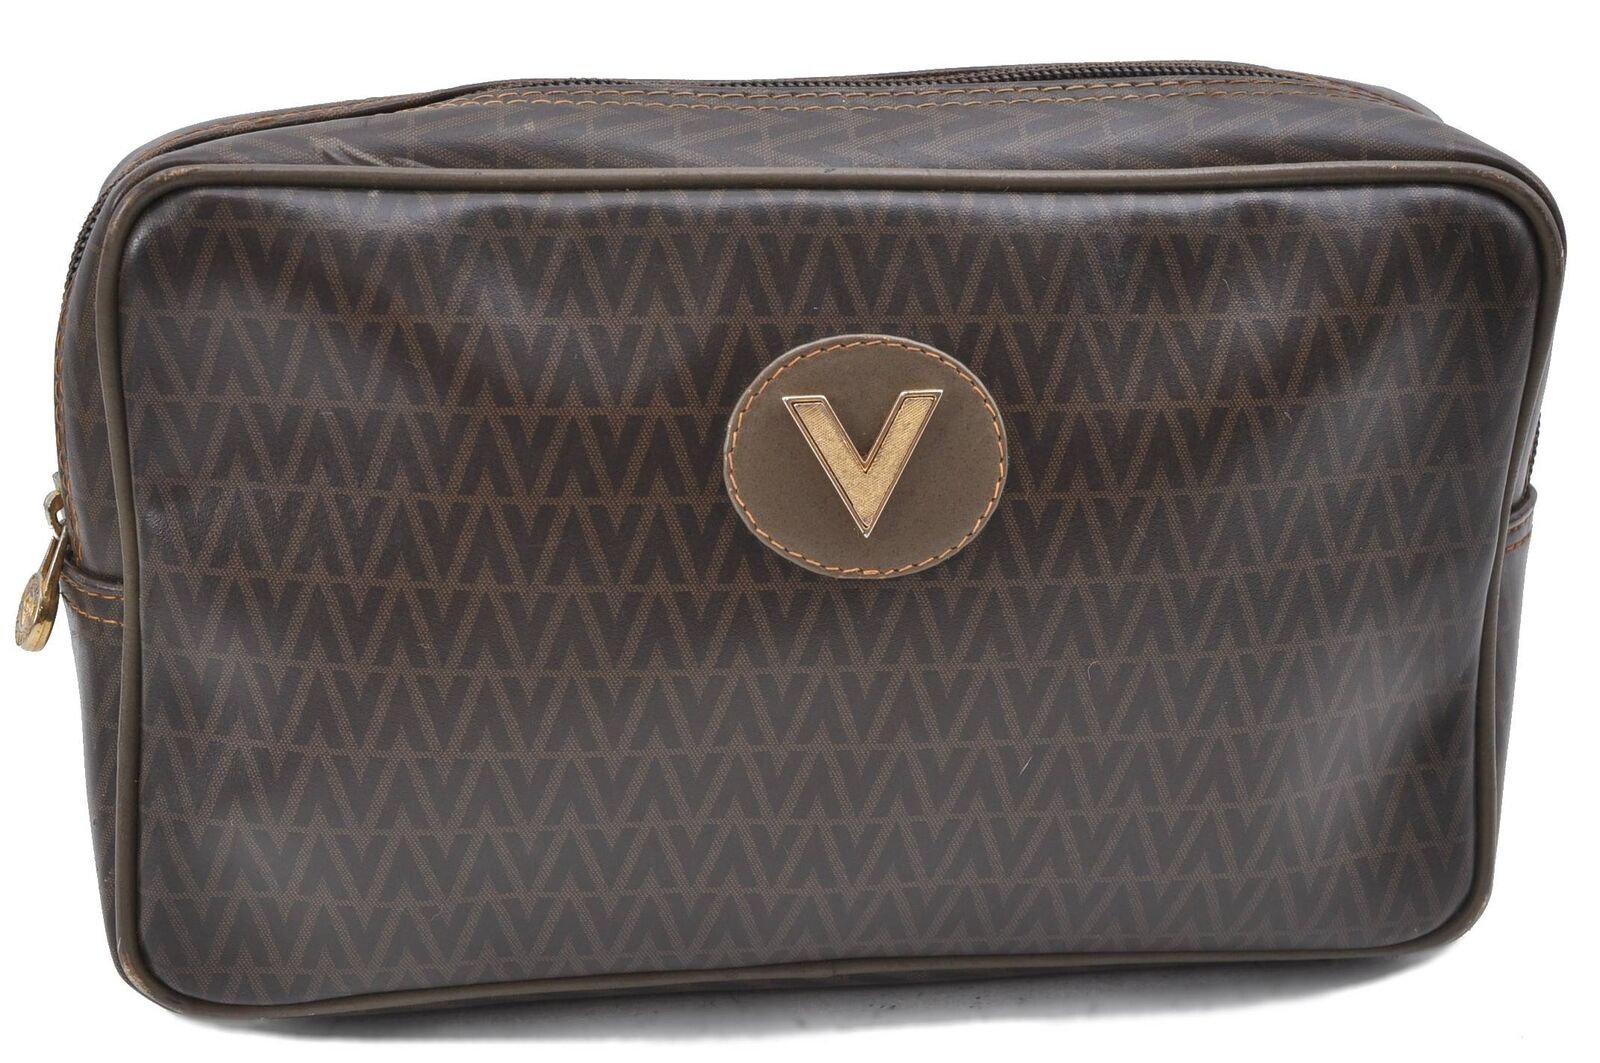 Authentic MARIO VALENTINO V Logo Clutch Hand Bag PVC Leather Brown H3764